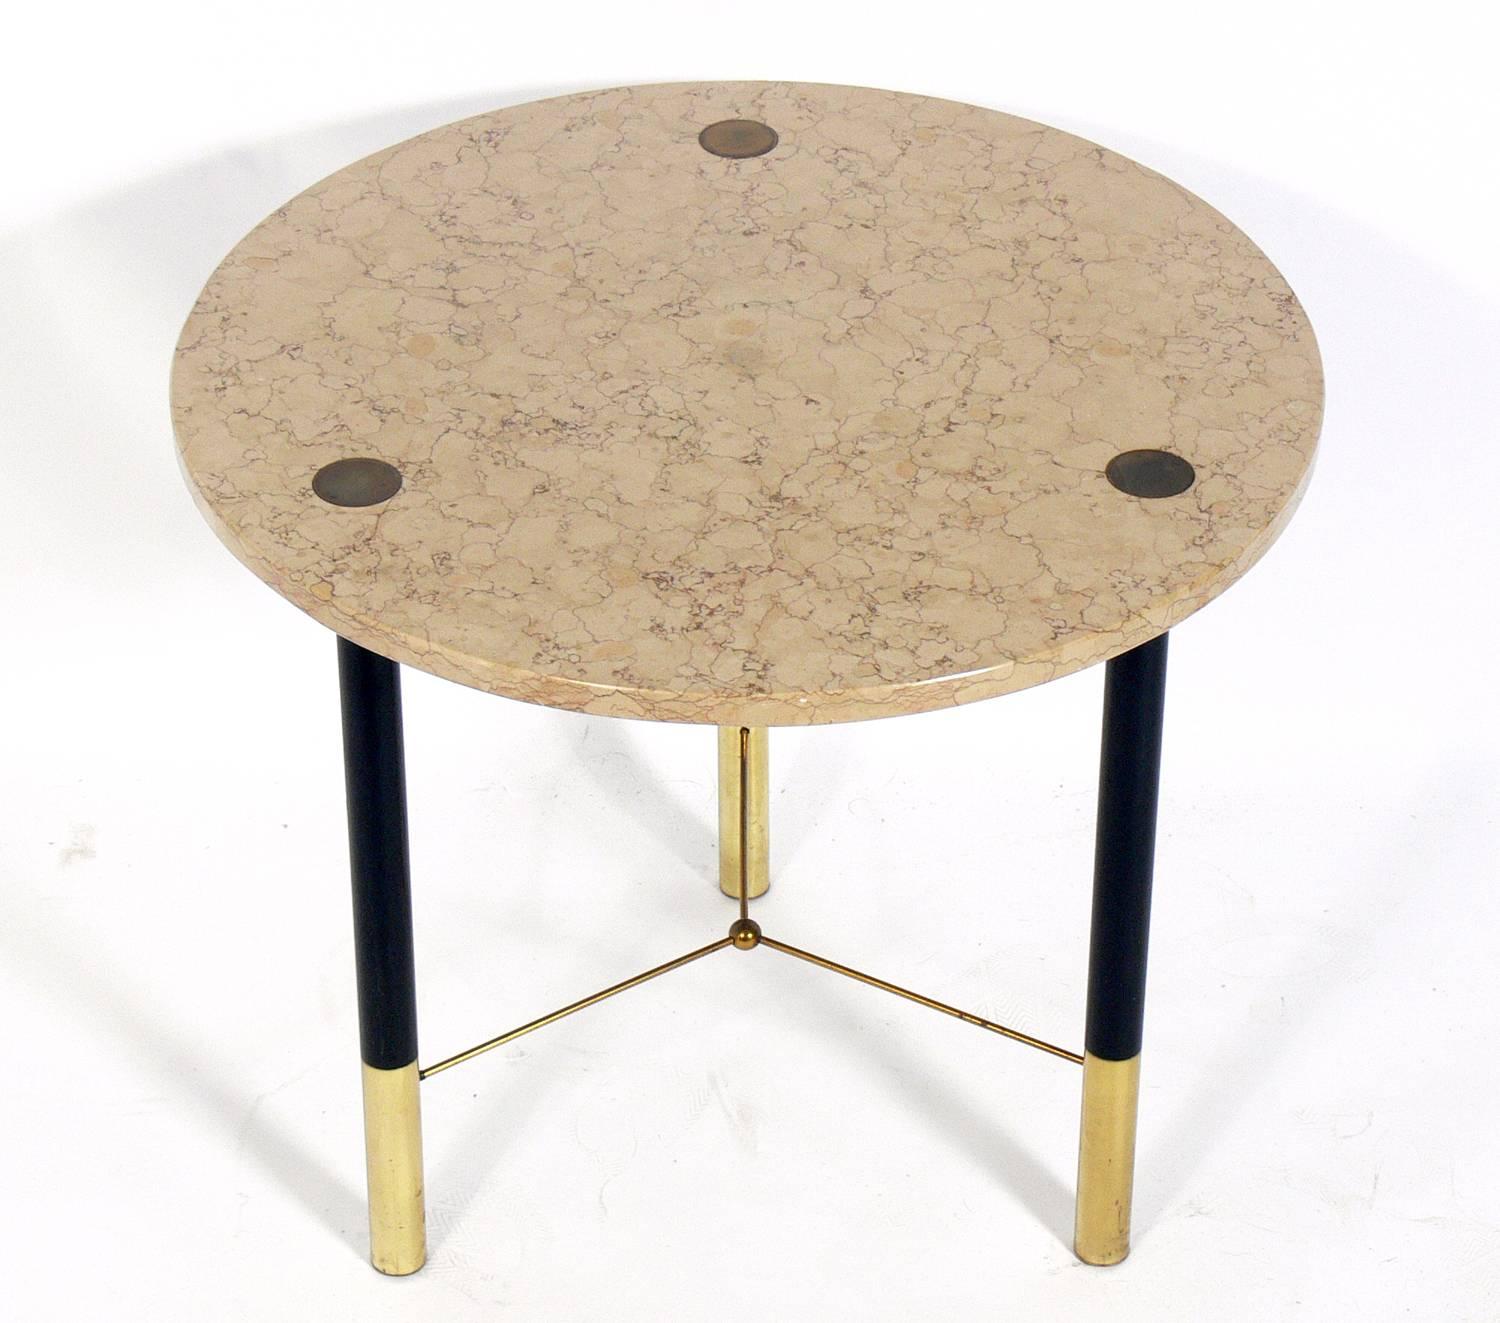 Elegant marble and brass table, American, circa 1960s. It is a versatile size and can be used as an end or side table, centre table or nightstand. This was originally a lamp table, but the lamp hole in the marble has been filled.